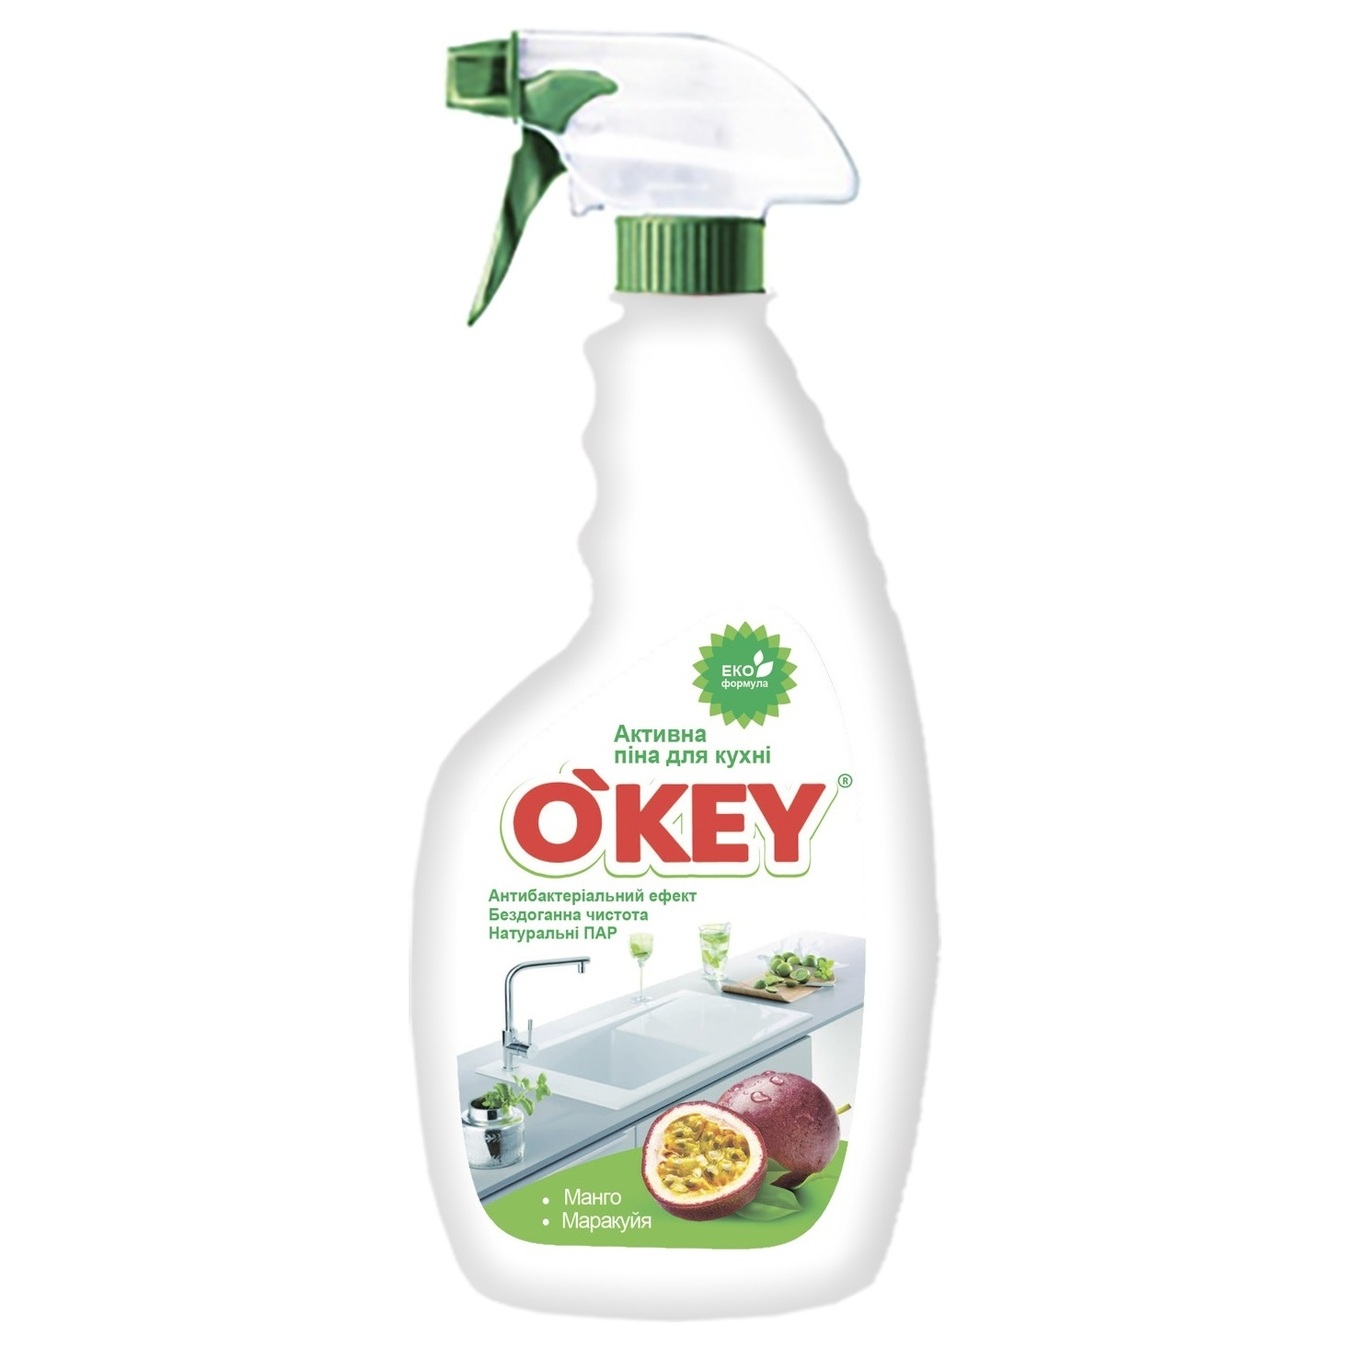 OKey active foam for cleaning the kitchen 500ml